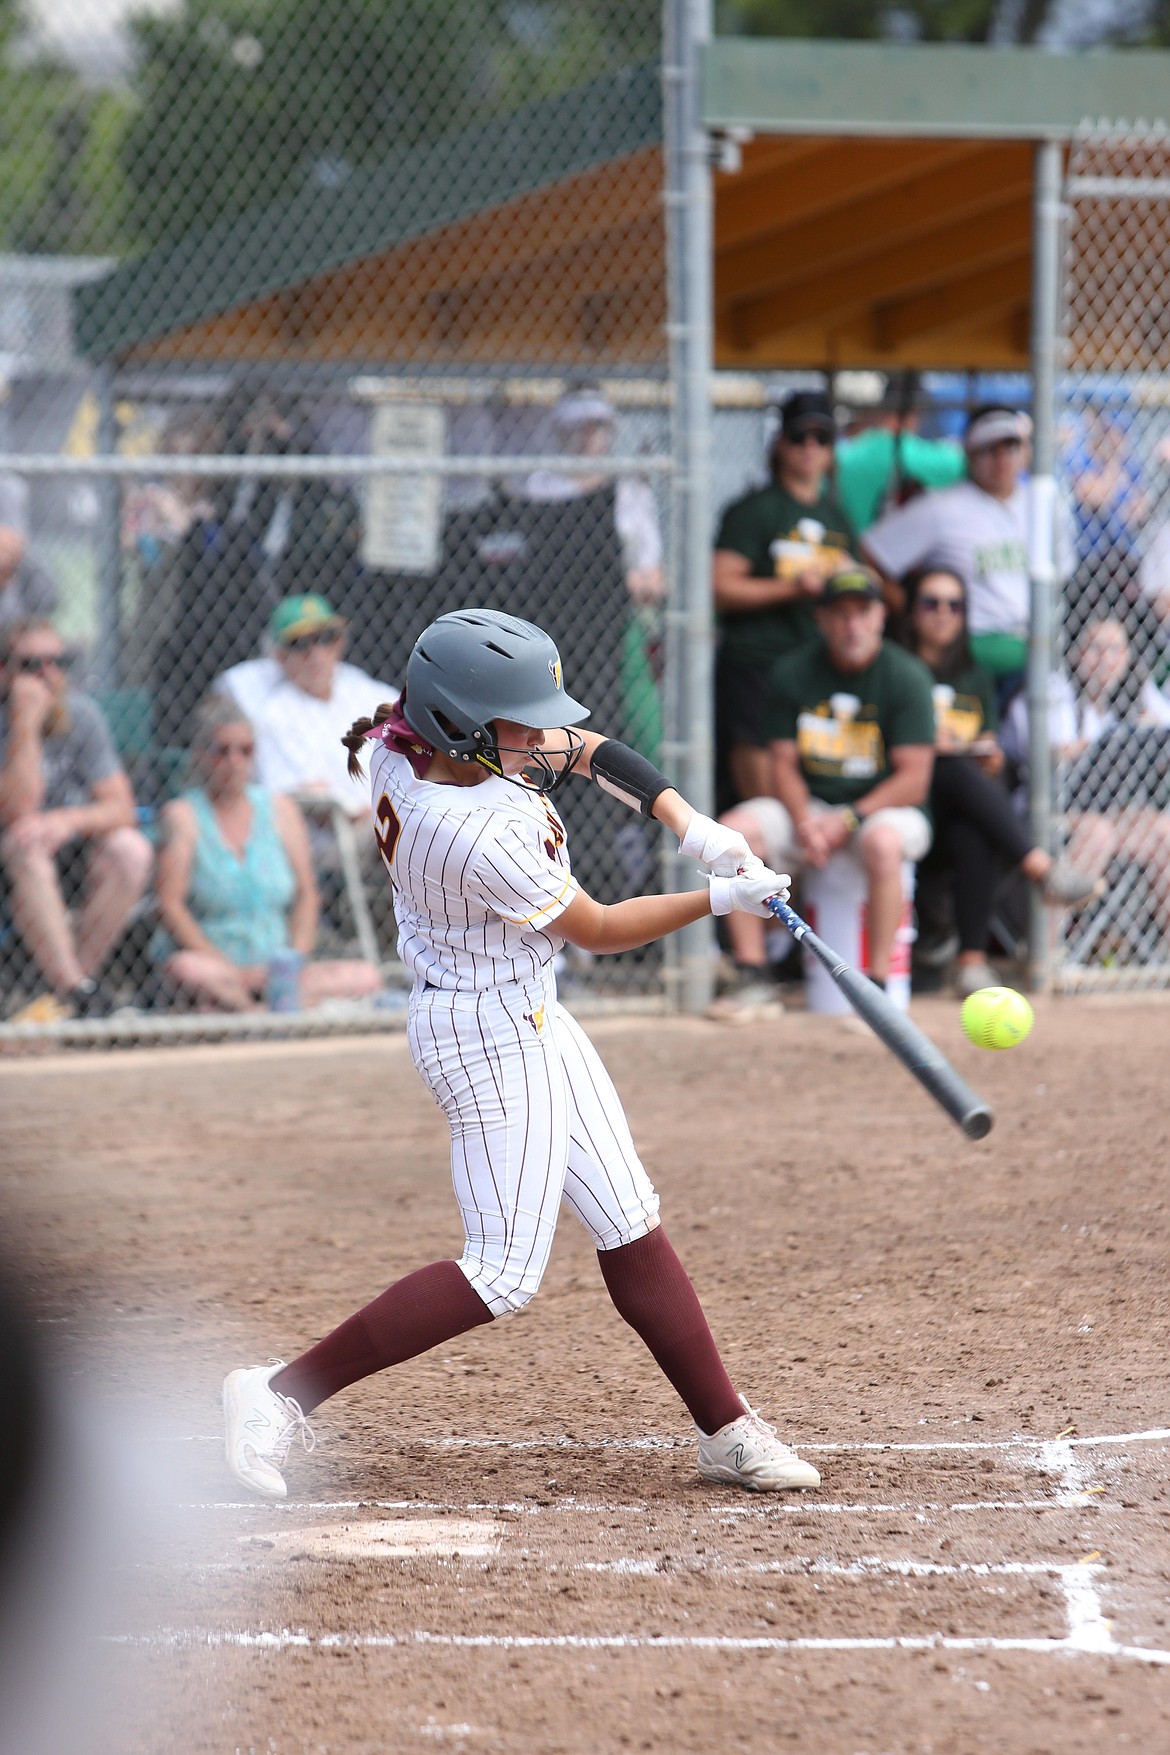 Moses Lake junior Raegen Hofheins makes contact with a pitch for a home run to left field during the top of the third inning against Richland.